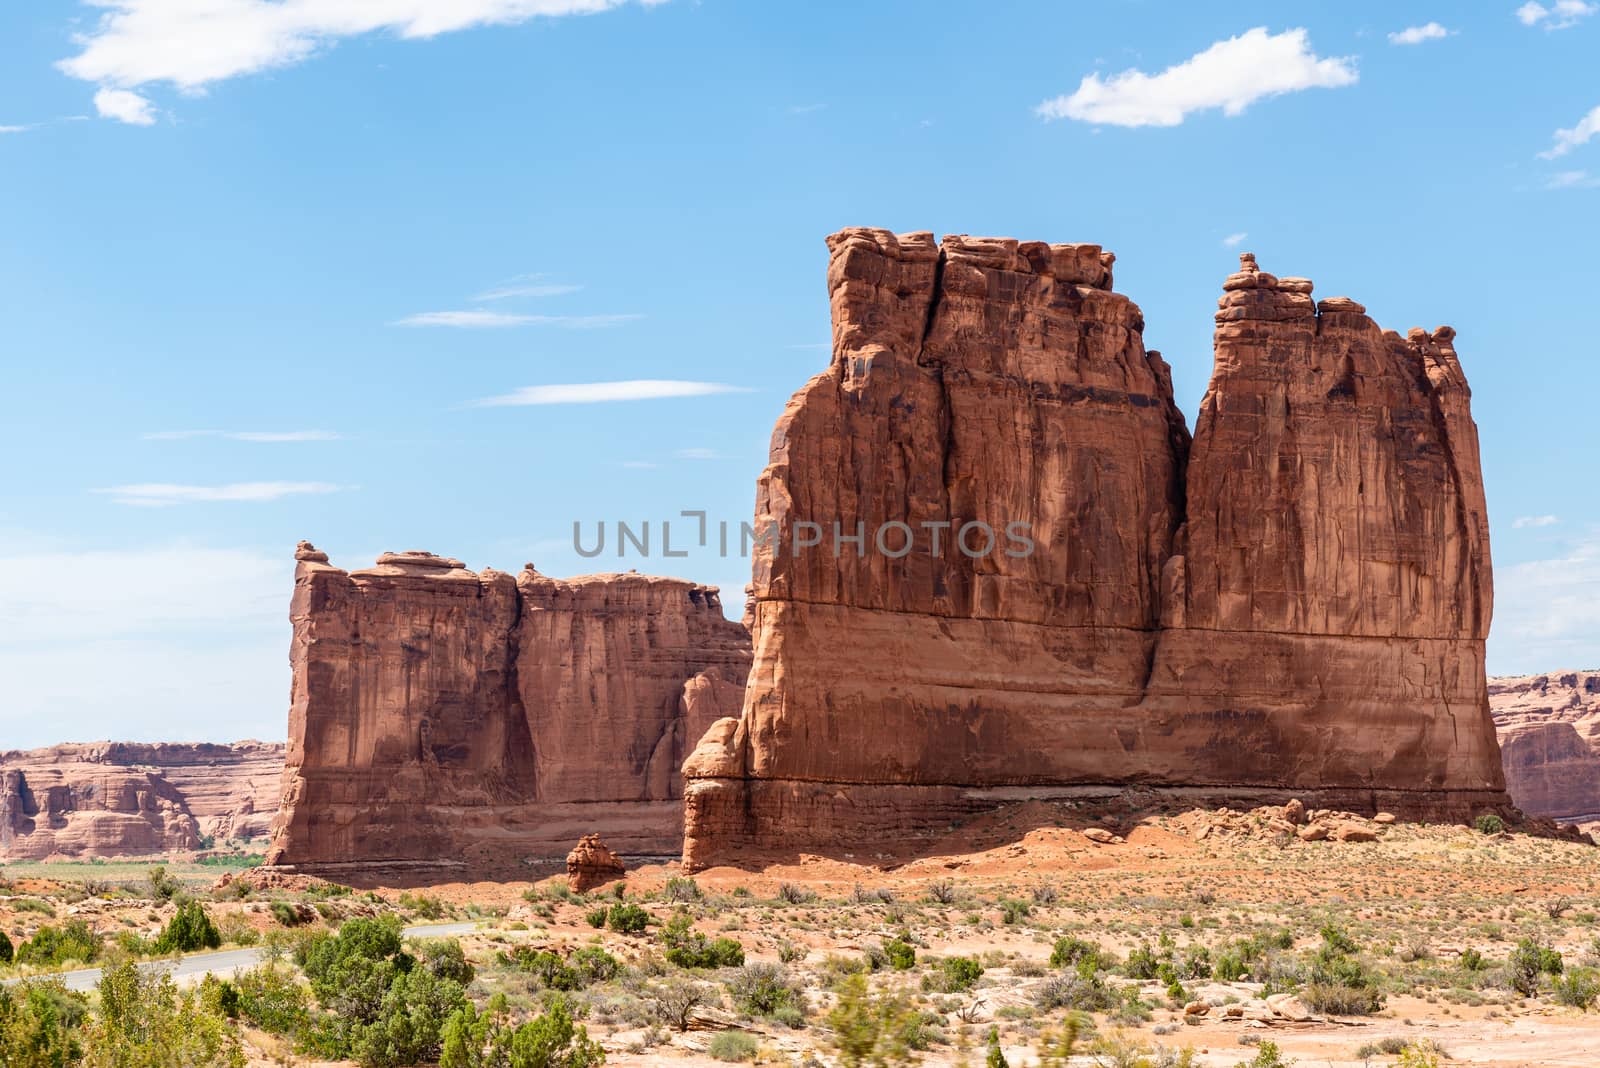 Sandstone formations in the entrance of Arches National Park, Utah by Njean